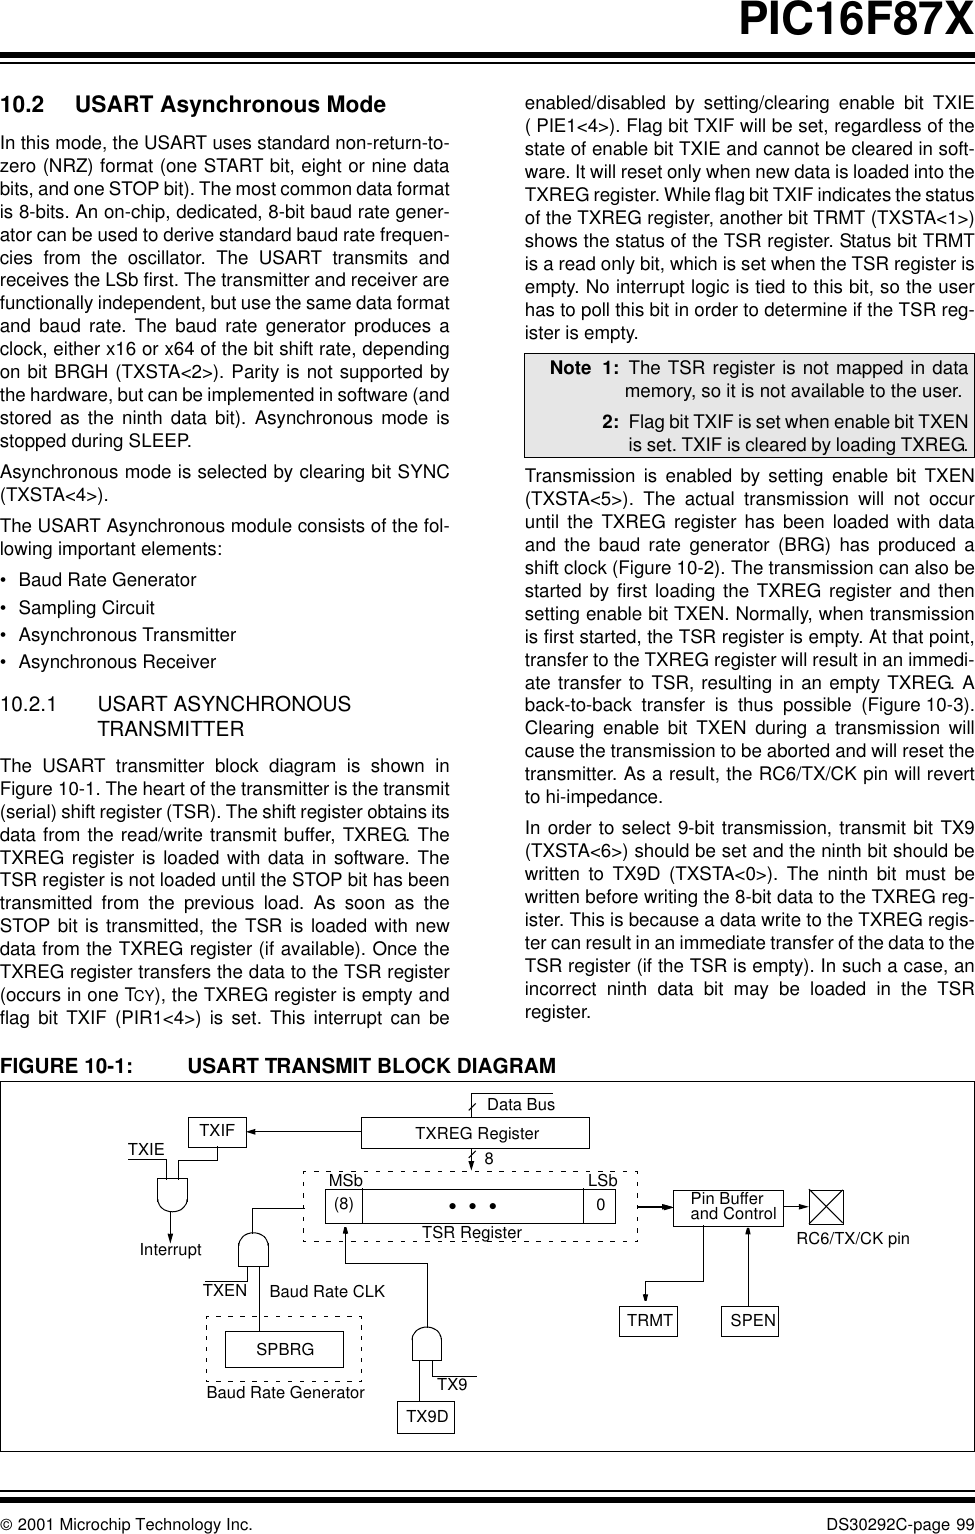  2001 Microchip Technology Inc. DS30292C-page 99PIC16F87X10.2 USART Asynchronous ModeIn this mode, the USART uses standard non-return-to-zero (NRZ) format (one START bit, eight or nine databits, and one STOP bit). The most common data formatis 8-bits. An on-chip, dedicated, 8-bit baud rate gener-ator can be used to derive standard baud rate frequen-cies from the oscillator. The USART transmits andreceives the LSb first. The transmitter and receiver arefunctionally independent, but use the same data formatand baud rate. The baud rate generator produces aclock, either x16 or x64 of the bit shift rate, dependingon bit BRGH (TXSTA&lt;2&gt;). Parity is not supported bythe hardware, but can be implemented in software (andstored as the ninth data bit). Asynchronous mode isstopped during SLEEP.Asynchronous mode is selected by clearing bit SYNC(TXSTA&lt;4&gt;). The USART Asynchronous module consists of the fol-lowing important elements:•Baud Rate Generator•Sampling Circuit•Asynchronous Transmitter•Asynchronous Receiver10.2.1 USART ASYNCHRONOUS TRANSMITTERThe USART transmitter block diagram is shown inFigure 10-1. The heart of the transmitter is the transmit(serial) shift register (TSR). The shift register obtains itsdata from the read/write transmit buffer, TXREG. TheTXREG register is loaded with data in software. TheTSR register is not loaded until the STOP bit has beentransmitted from the previous load. As soon as theSTOP bit is transmitted, the TSR is loaded with newdata from the TXREG register (if available). Once theTXREG register transfers the data to the TSR register(occurs in one TCY), the TXREG register is empty andflag bit TXIF (PIR1&lt;4&gt;) is set. This interrupt can beenabled/disabled by setting/clearing enable bit TXIE( PIE1&lt;4&gt;). Flag bit TXIF will be set, regardless of thestate of enable bit TXIE and cannot be cleared in soft-ware. It will reset only when new data is loaded into theTXREG register. While flag bit TXIF indicates the statusof the TXREG register, another bit TRMT (TXSTA&lt;1&gt;)shows the status of the TSR register. Status bit TRMTis a read only bit, which is set when the TSR register isempty. No interrupt logic is tied to this bit, so the userhas to poll this bit in order to determine if the TSR reg-ister is empty.Transmission is enabled by setting enable bit TXEN(TXSTA&lt;5&gt;). The actual transmission will not occuruntil the TXREG register has been loaded with dataand the baud rate generator (BRG) has produced ashift clock (Figure 10-2). The transmission can also bestarted by first loading the TXREG register and thensetting enable bit TXEN. Normally, when transmissionis first started, the TSR register is empty. At that point,transfer to the TXREG register will result in an immedi-ate transfer to TSR, resulting in an empty TXREG. Aback-to-back transfer is thus possible (Figure 10-3).Clearing enable bit TXEN during a transmission willcause the transmission to be aborted and will reset thetransmitter. As a result, the RC6/TX/CK pin will revertto hi-impedance.In order to select 9-bit transmission, transmit bit TX9(TXSTA&lt;6&gt;) should be set and the ninth bit should bewritten to TX9D (TXSTA&lt;0&gt;). The ninth bit must bewritten before writing the 8-bit data to the TXREG reg-ister. This is because a data write to the TXREG regis-ter can result in an immediate transfer of the data to theTSR register (if the TSR is empty). In such a case, anincorrect ninth data bit may be loaded in the TSRregister.FIGURE 10-1: USART TRANSMIT BLOCK DIAGRAMNote 1: The TSR register is not mapped in datamemory, so it is not available to the user.2: Flag bit TXIF is set when enable bit TXENis set. TXIF is cleared by loading TXREG.TXIFTXIEInterruptTXEN Baud Rate CLKSPBRGBaud Rate GeneratorTX9DMSb LSbData BusTXREG RegisterTSR Register(8) 0TX9TRMT SPENRC6/TX/CK pinPin Bufferand Control8•   •   •